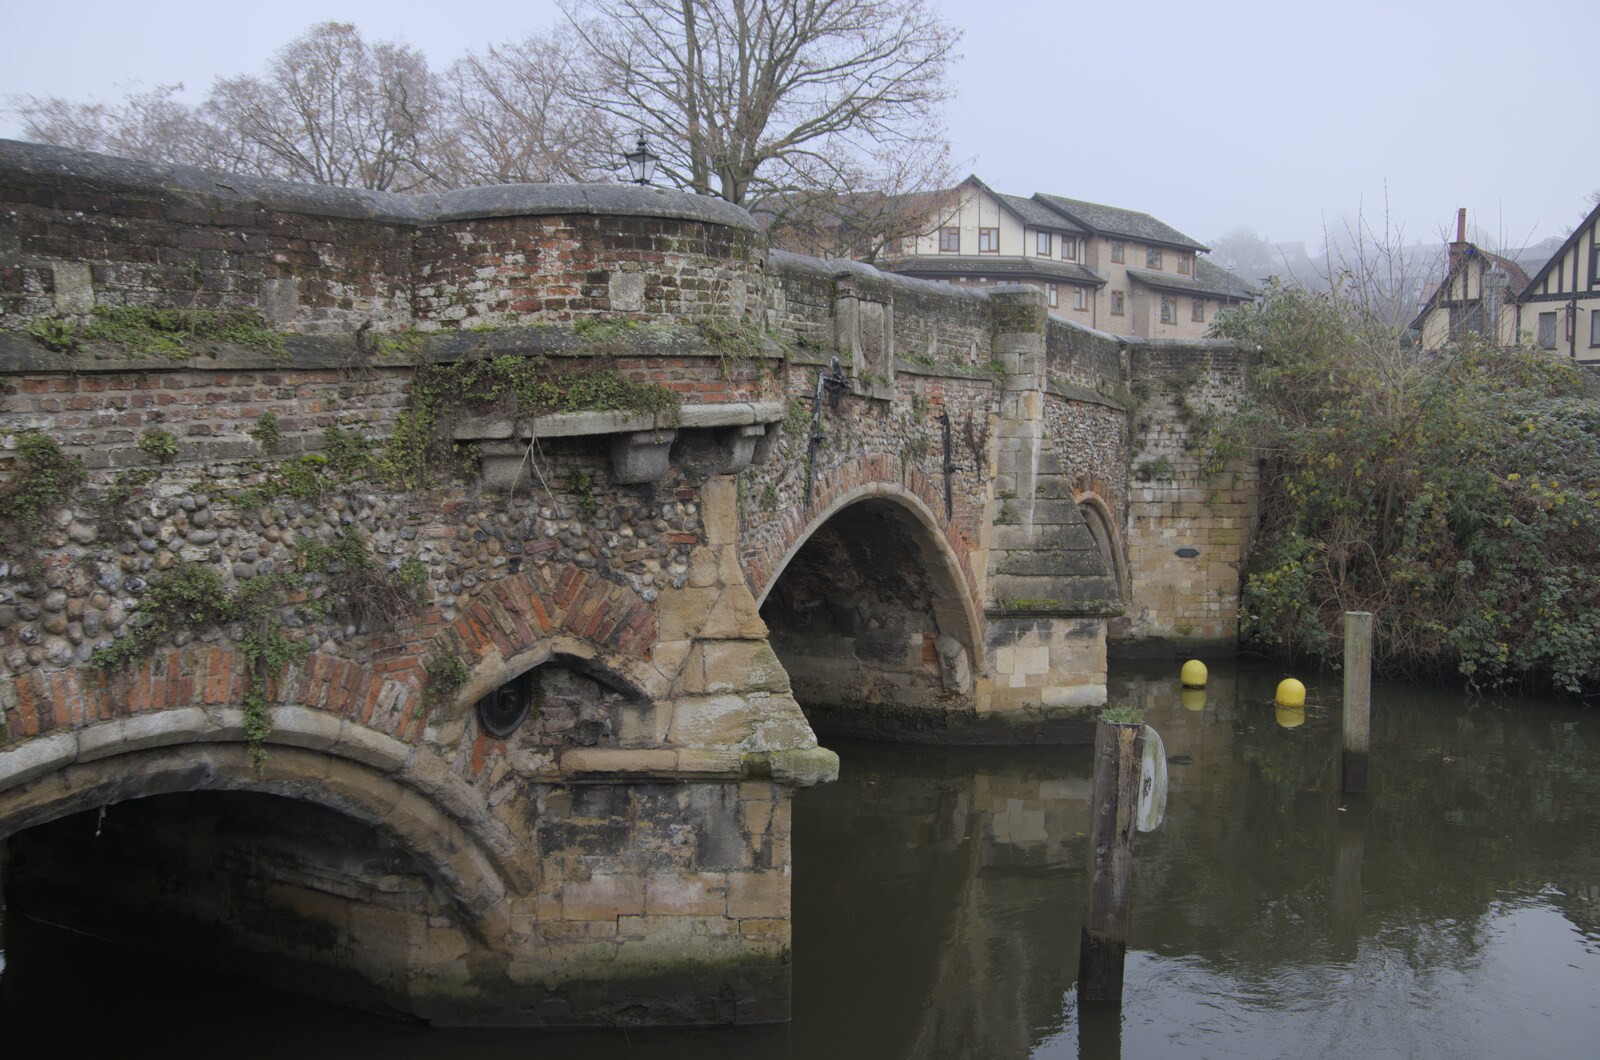 The C14th Bishop Bridge at Bishopgate from A Tour of the Cathedral, Norwich, Norfolk - 2nd December 2023